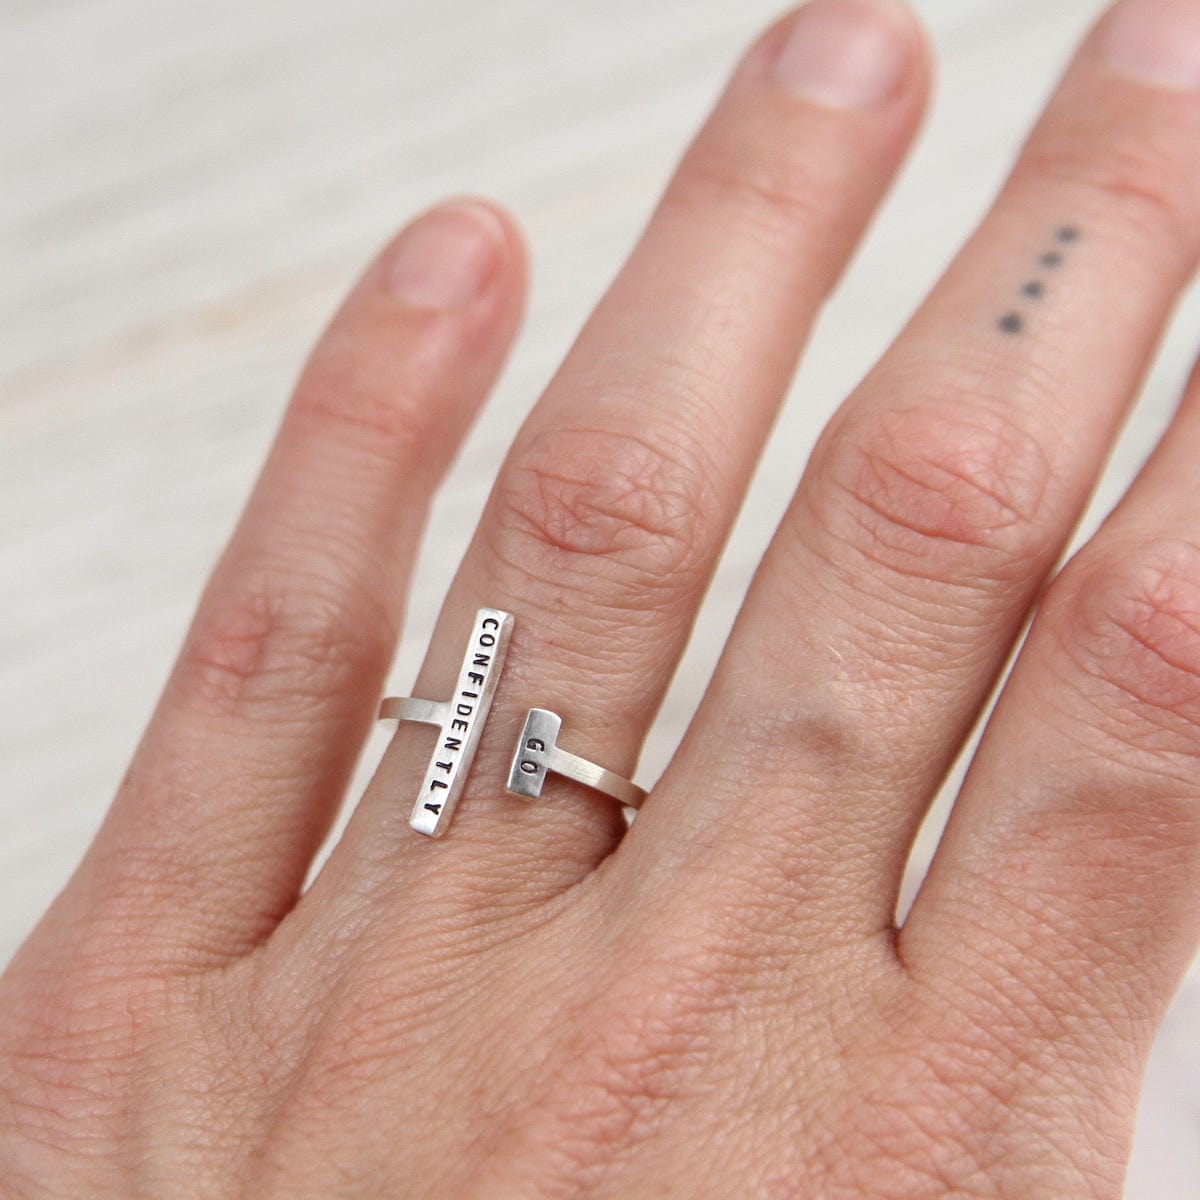 RNG Adjustable Ring - "Go Confidently"